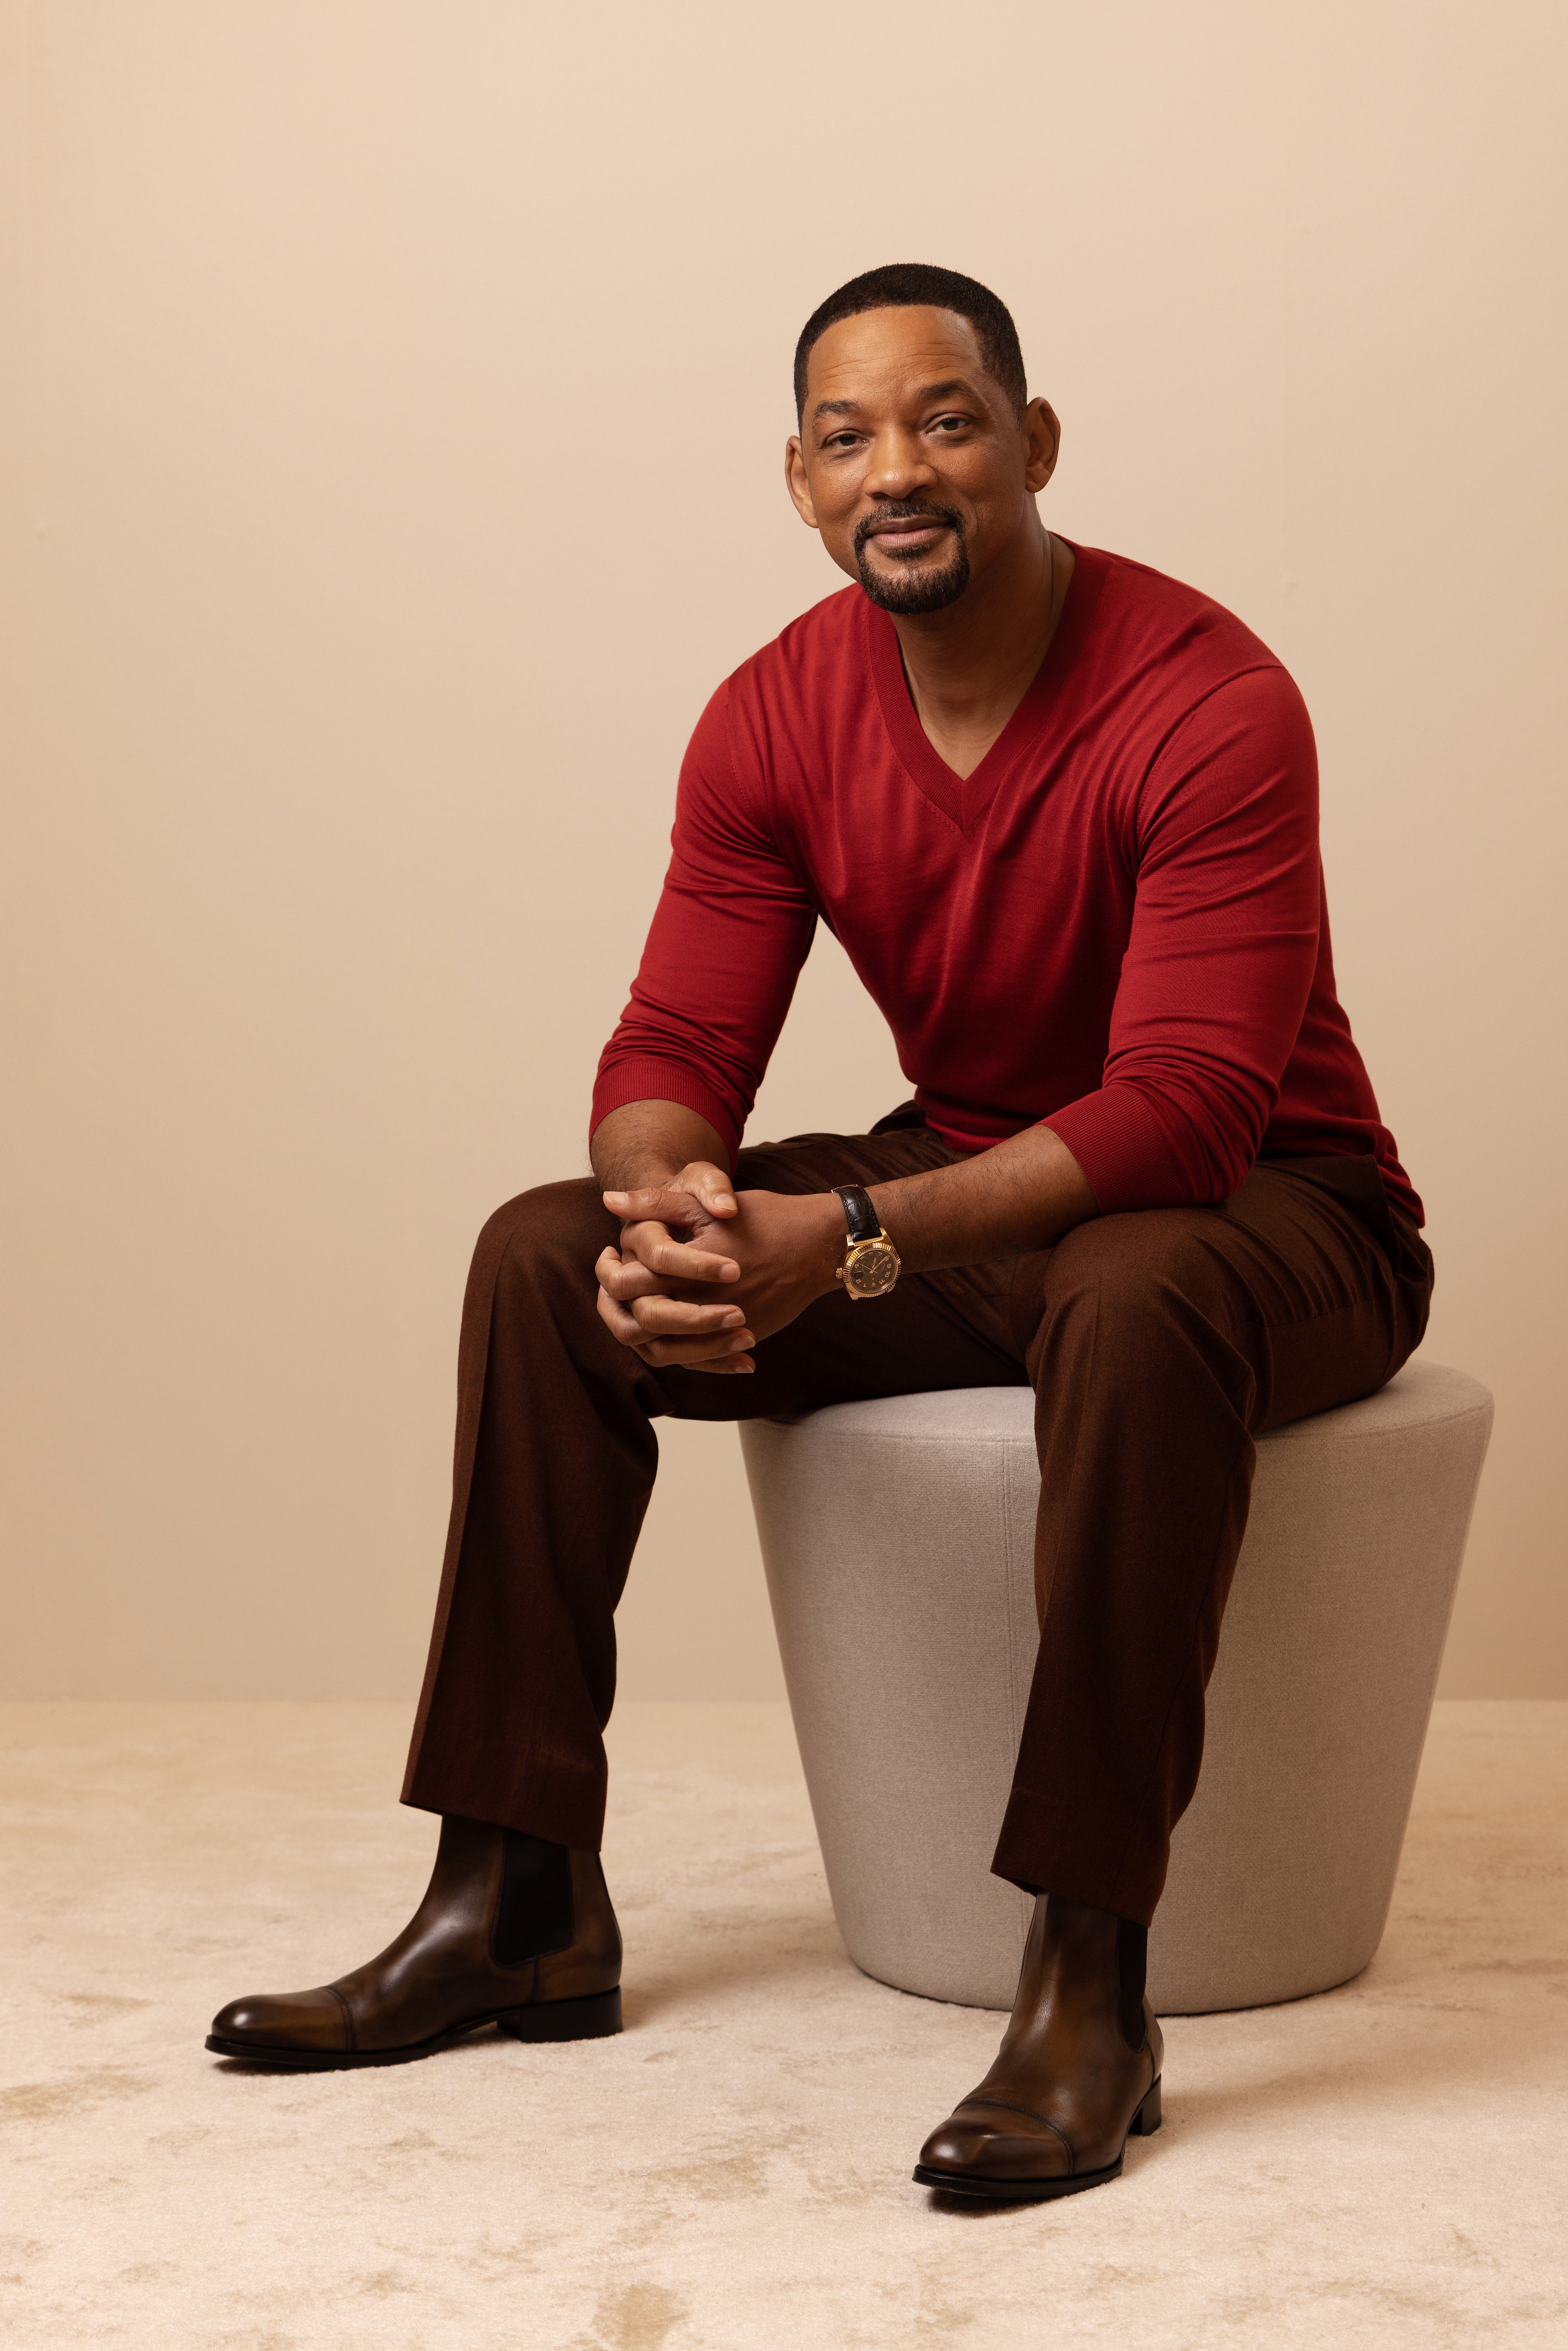 Will-Smith-net-worth-happiness-true-fulfillment-turning-50